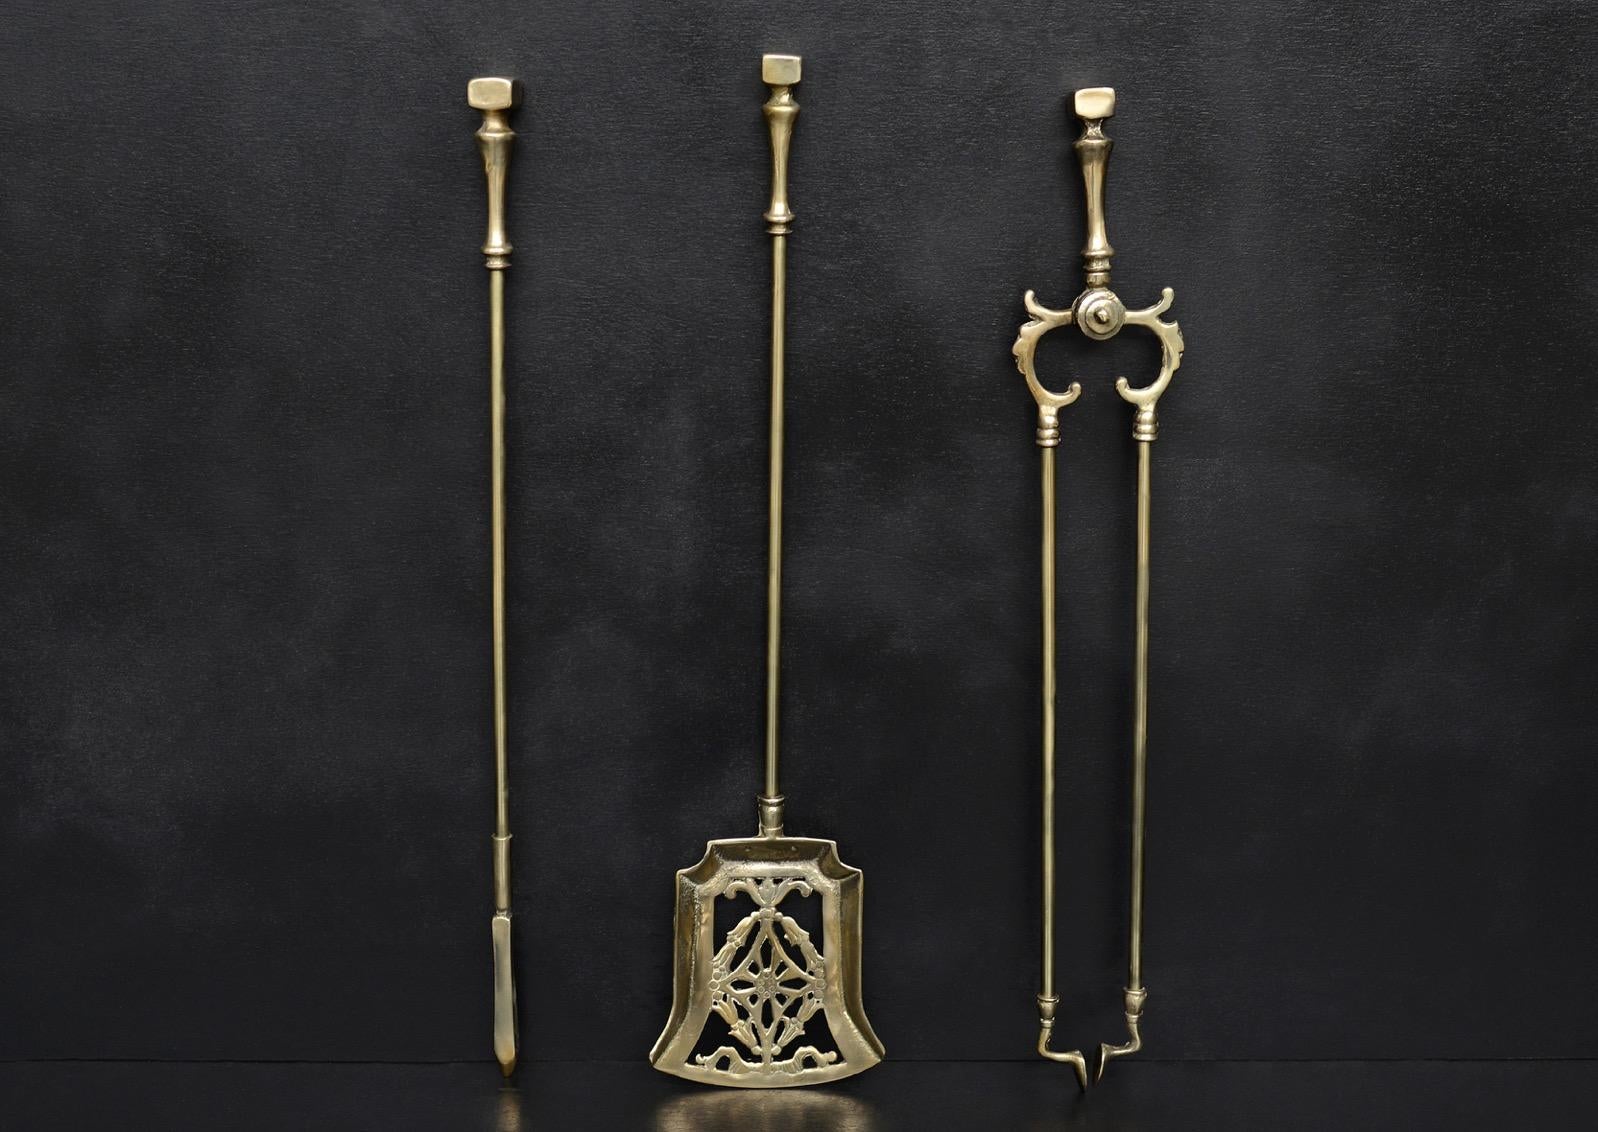 A set of Victorian brass fire tools with pierced shovel. English, mid 19th century.

Stock No: FT512 £850 + VAT
Length: 660 mm 26